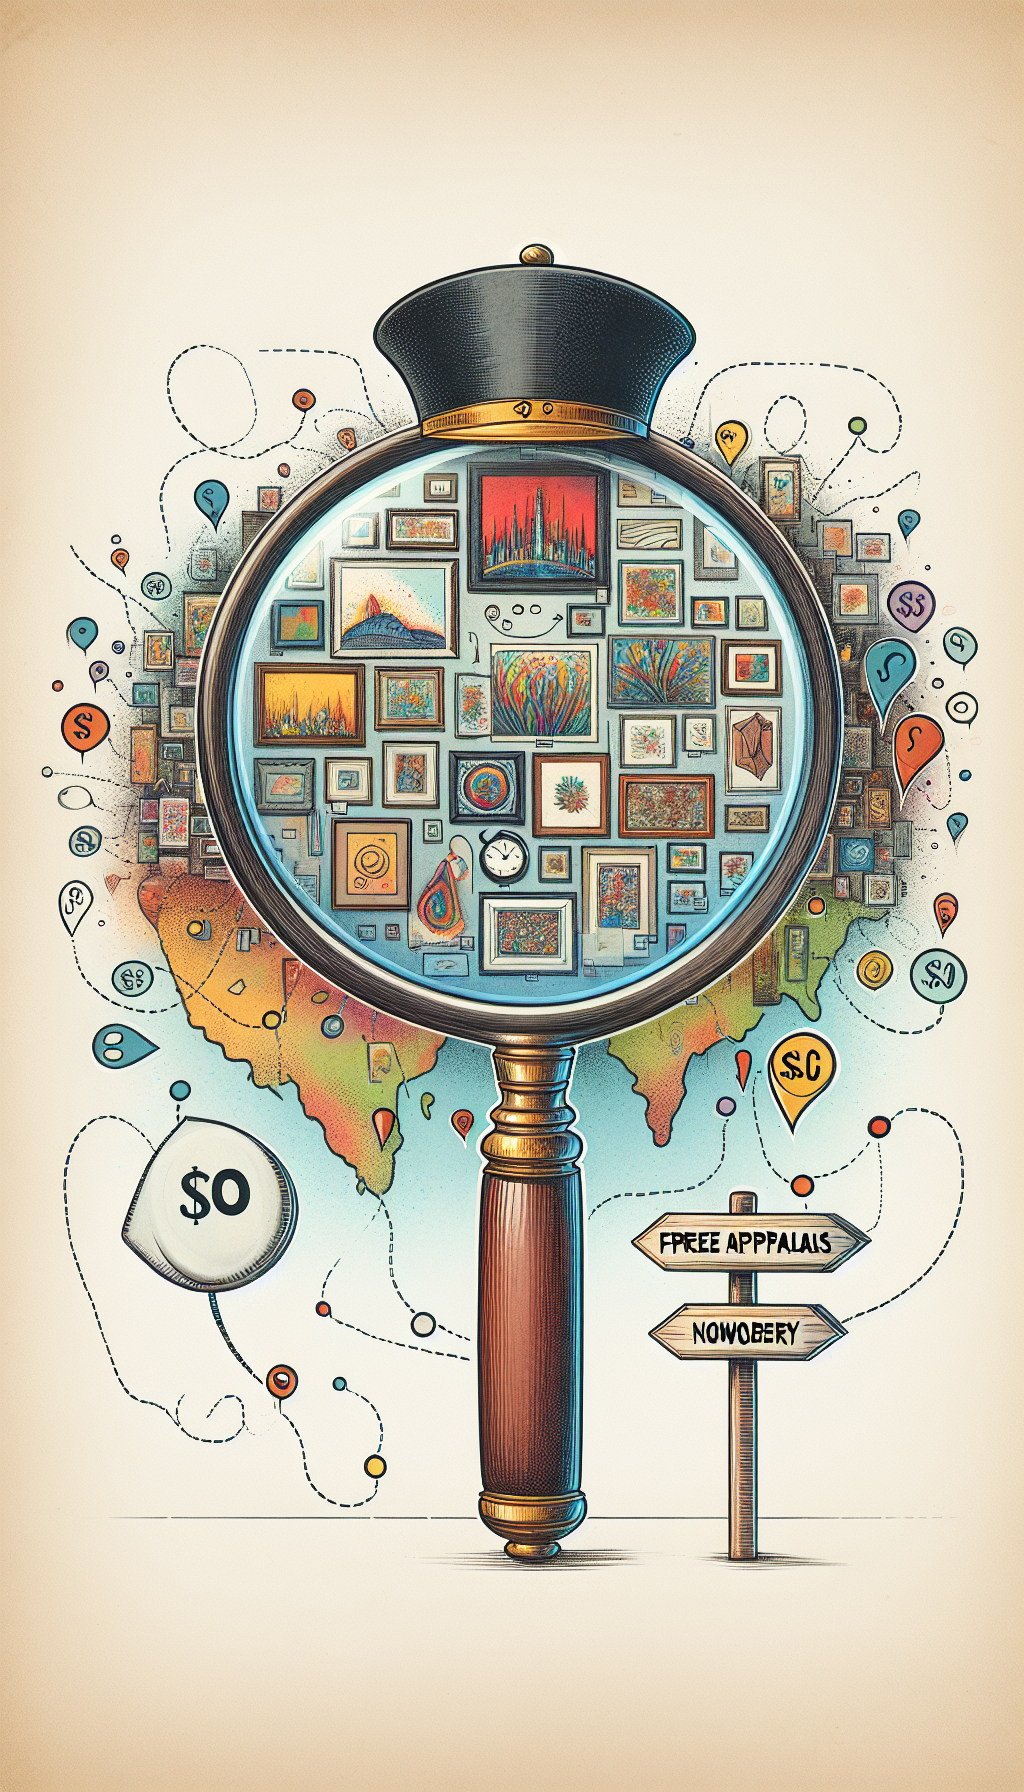 An animated magnifying glass adorned with an expert's cap peers over a diverse gallery of artwork. Within its lens, paintings transform into price tags with "$0". A dotted line from the magnifying glass extends to the corner with a pin drop labeled "Free Appraisals Nearby," against a backdrop of a whimsical map, blending watercolor, line art, and digital graphics.